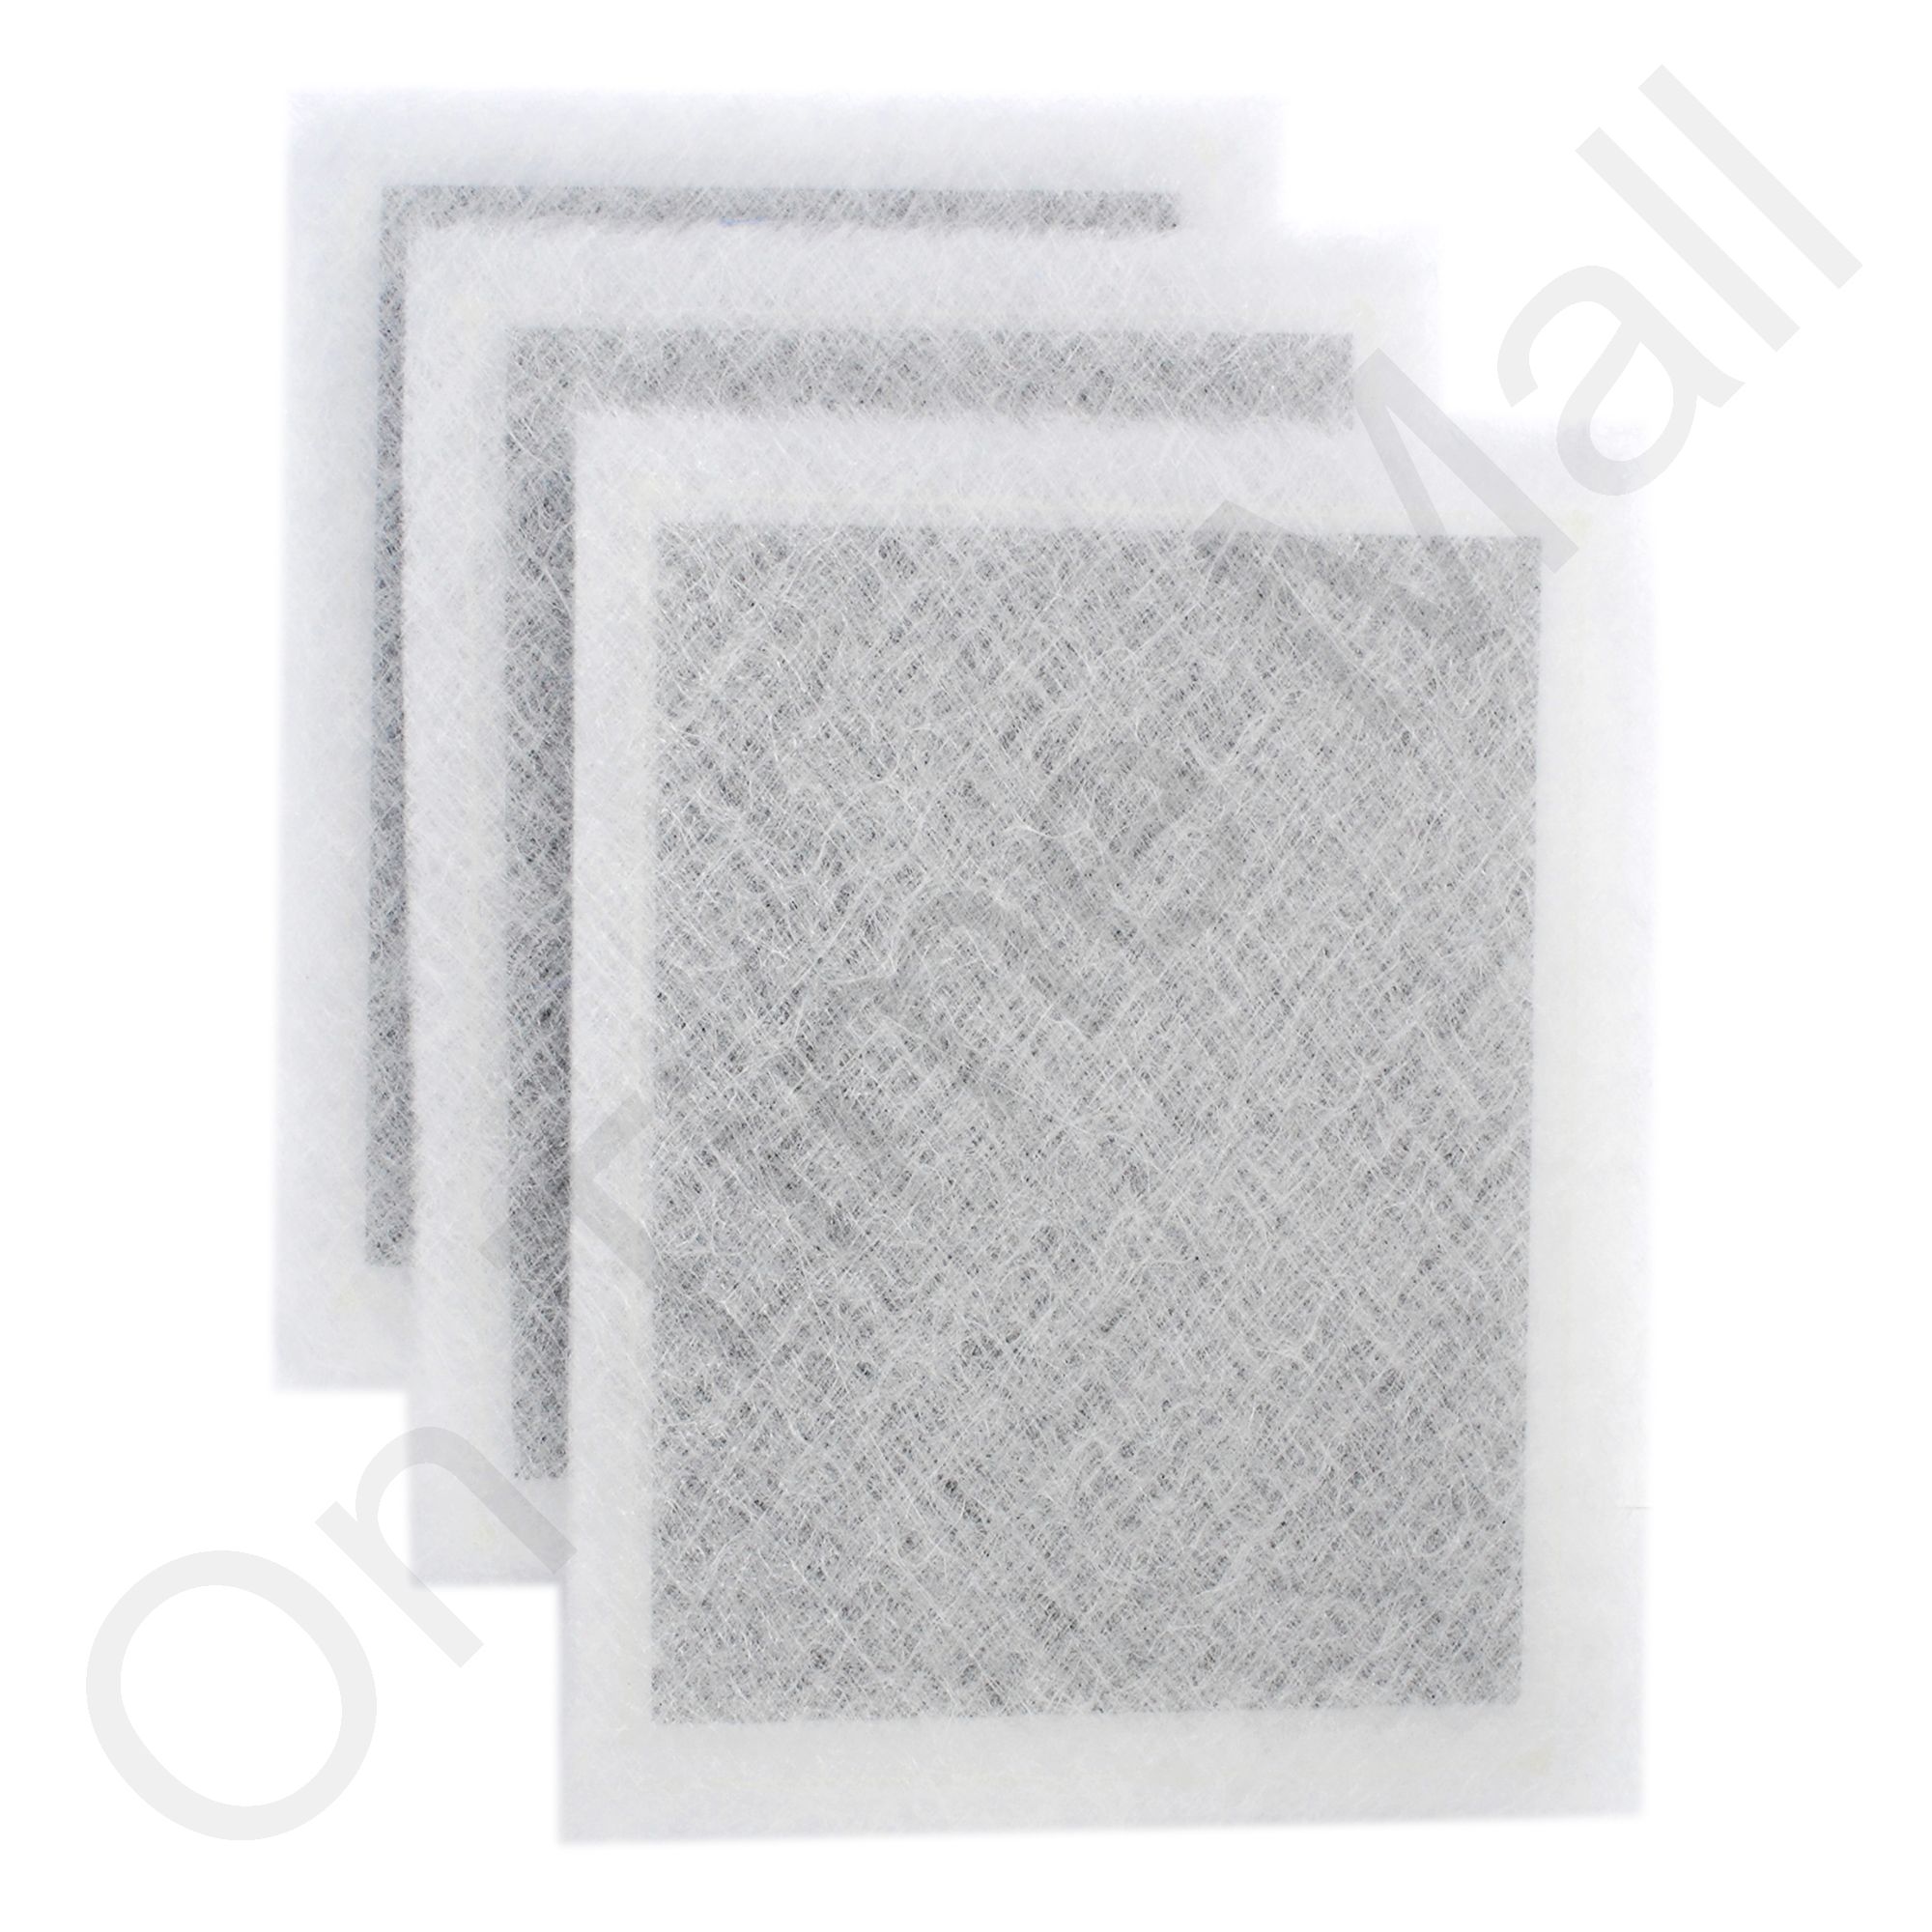 Dynamic Air Filter Replacement Filters 3 Pack Various Size Pads Free Shipping W* 